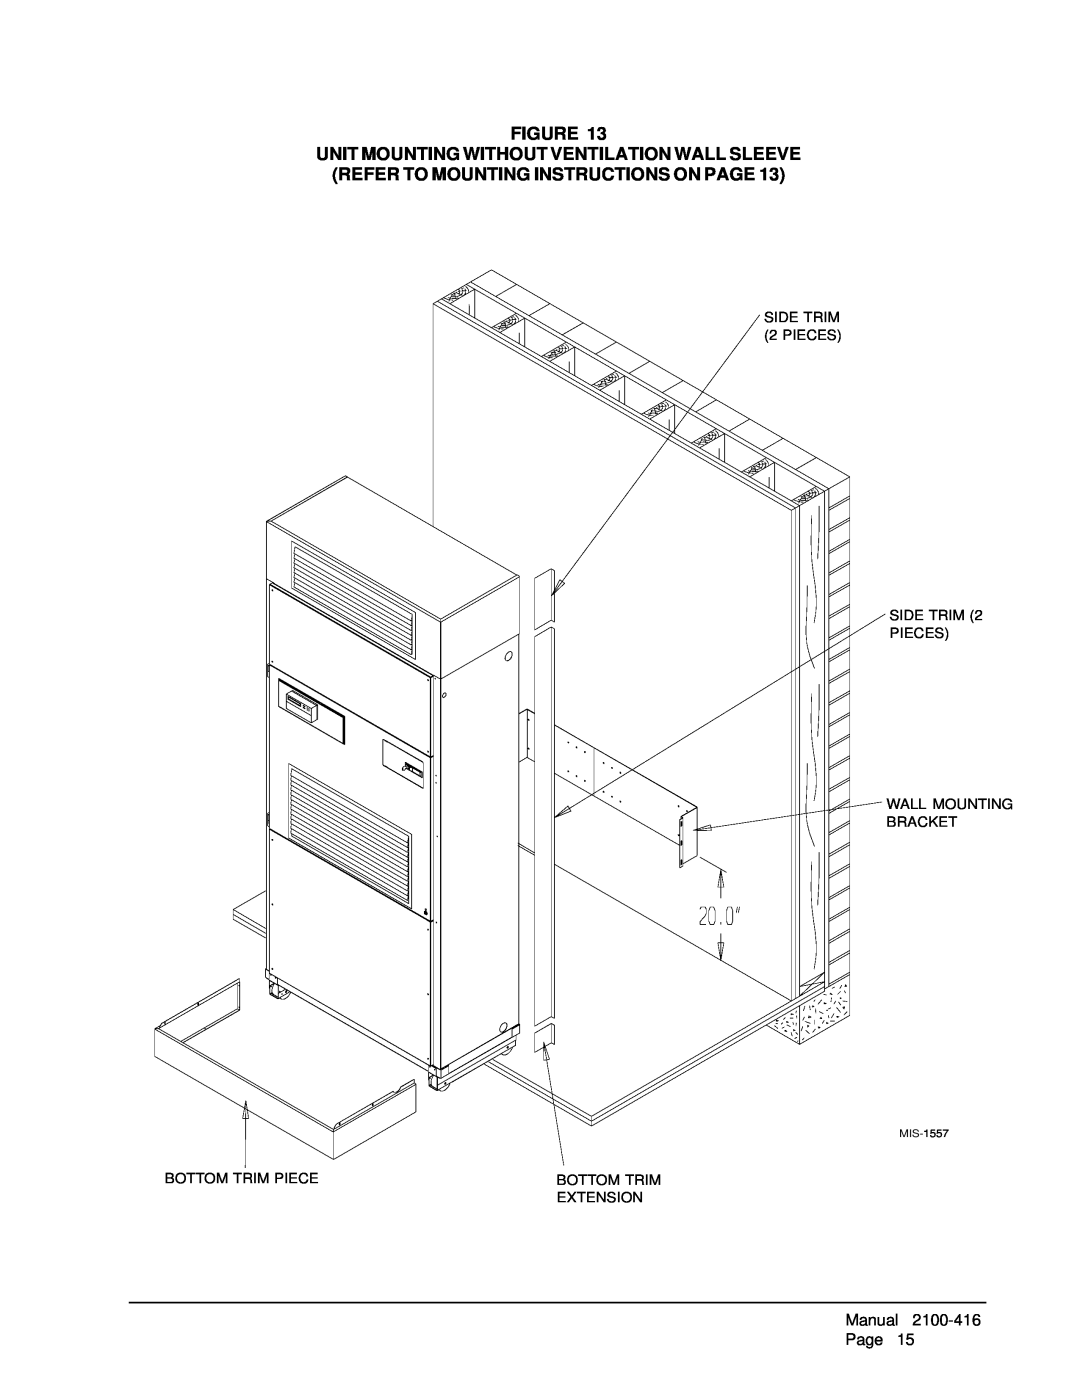 Bard QC501 Unit Mounting Without Ventilation Wall Sleeve, Refer To Mounting Instructions On Page, Bracket, Bottom Trim 